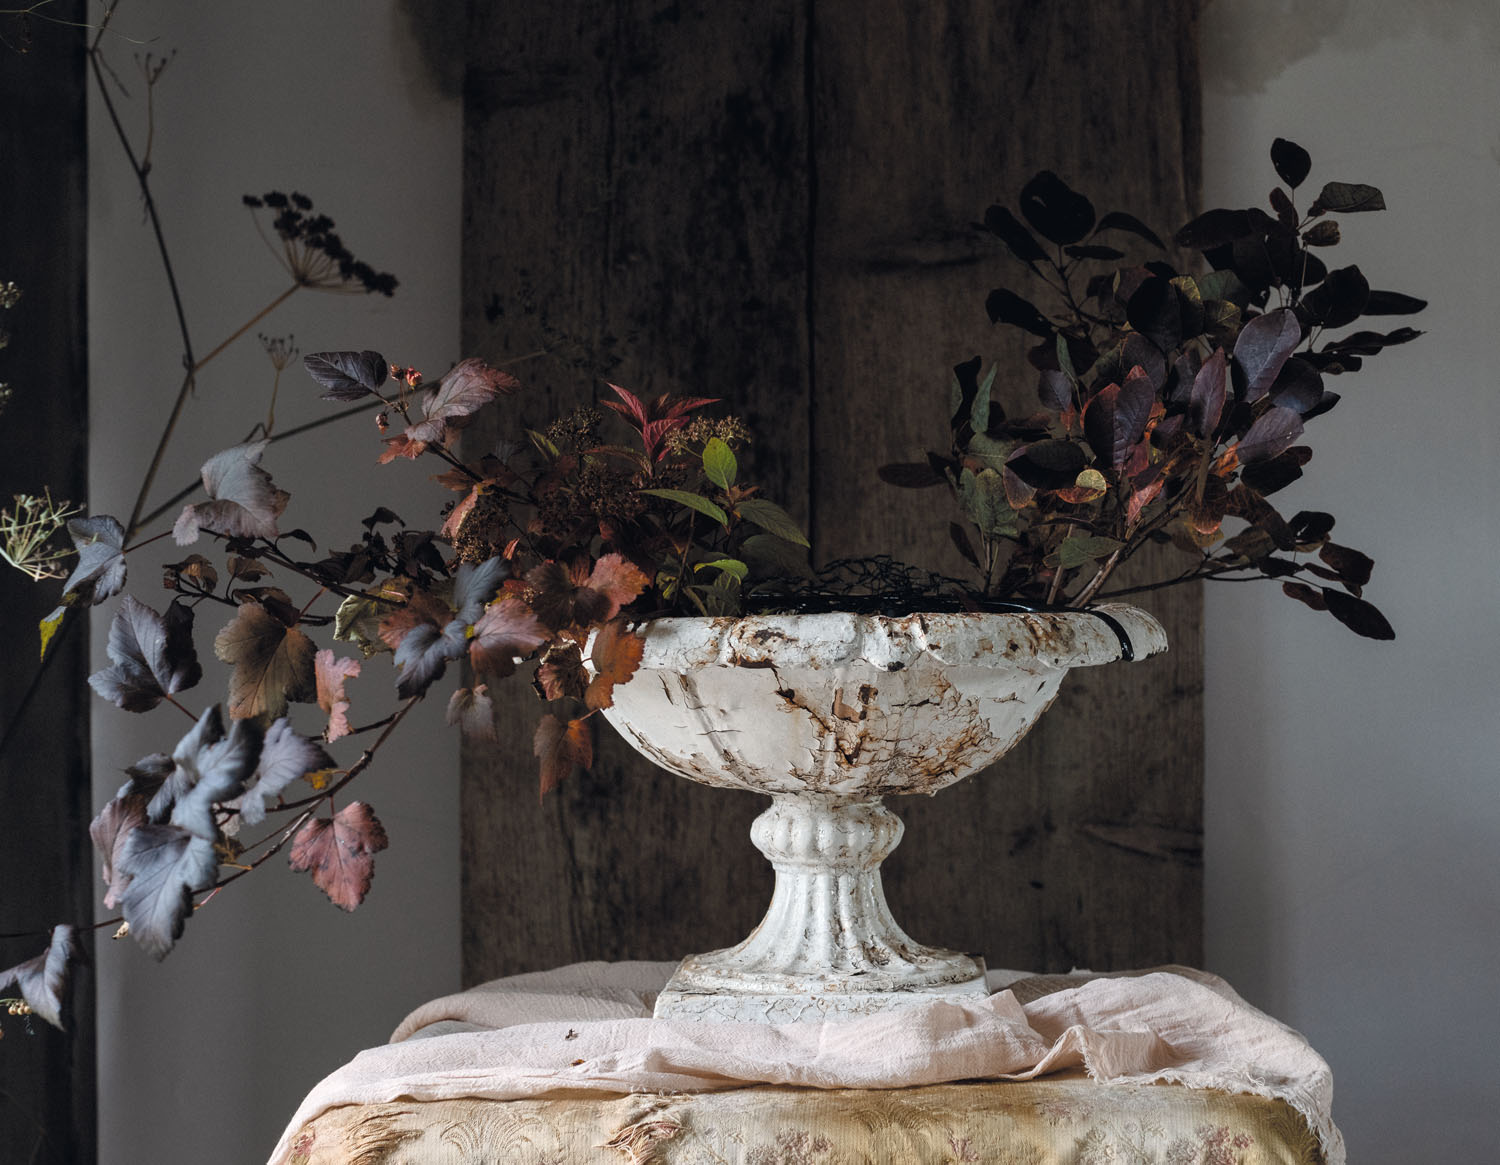 Branches of autumnal color ranging from deep purple to brown to red, establish an S-curve shape for The Flower Hunter Lucy Hunter's autumnal arrangement